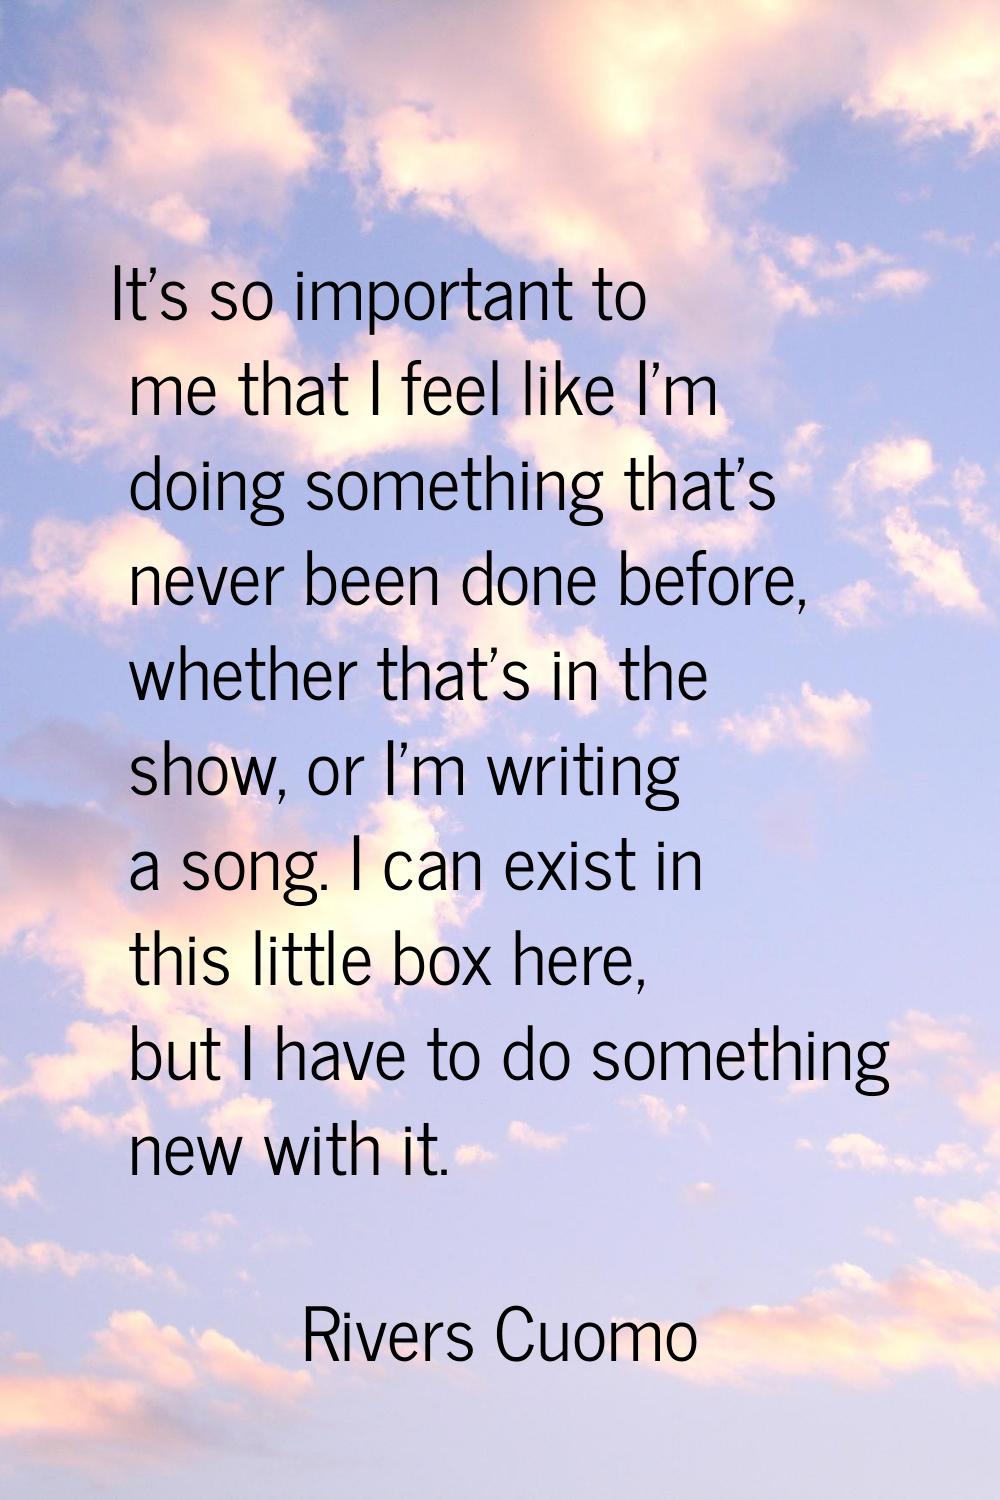 It's so important to me that I feel like I'm doing something that's never been done before, whether